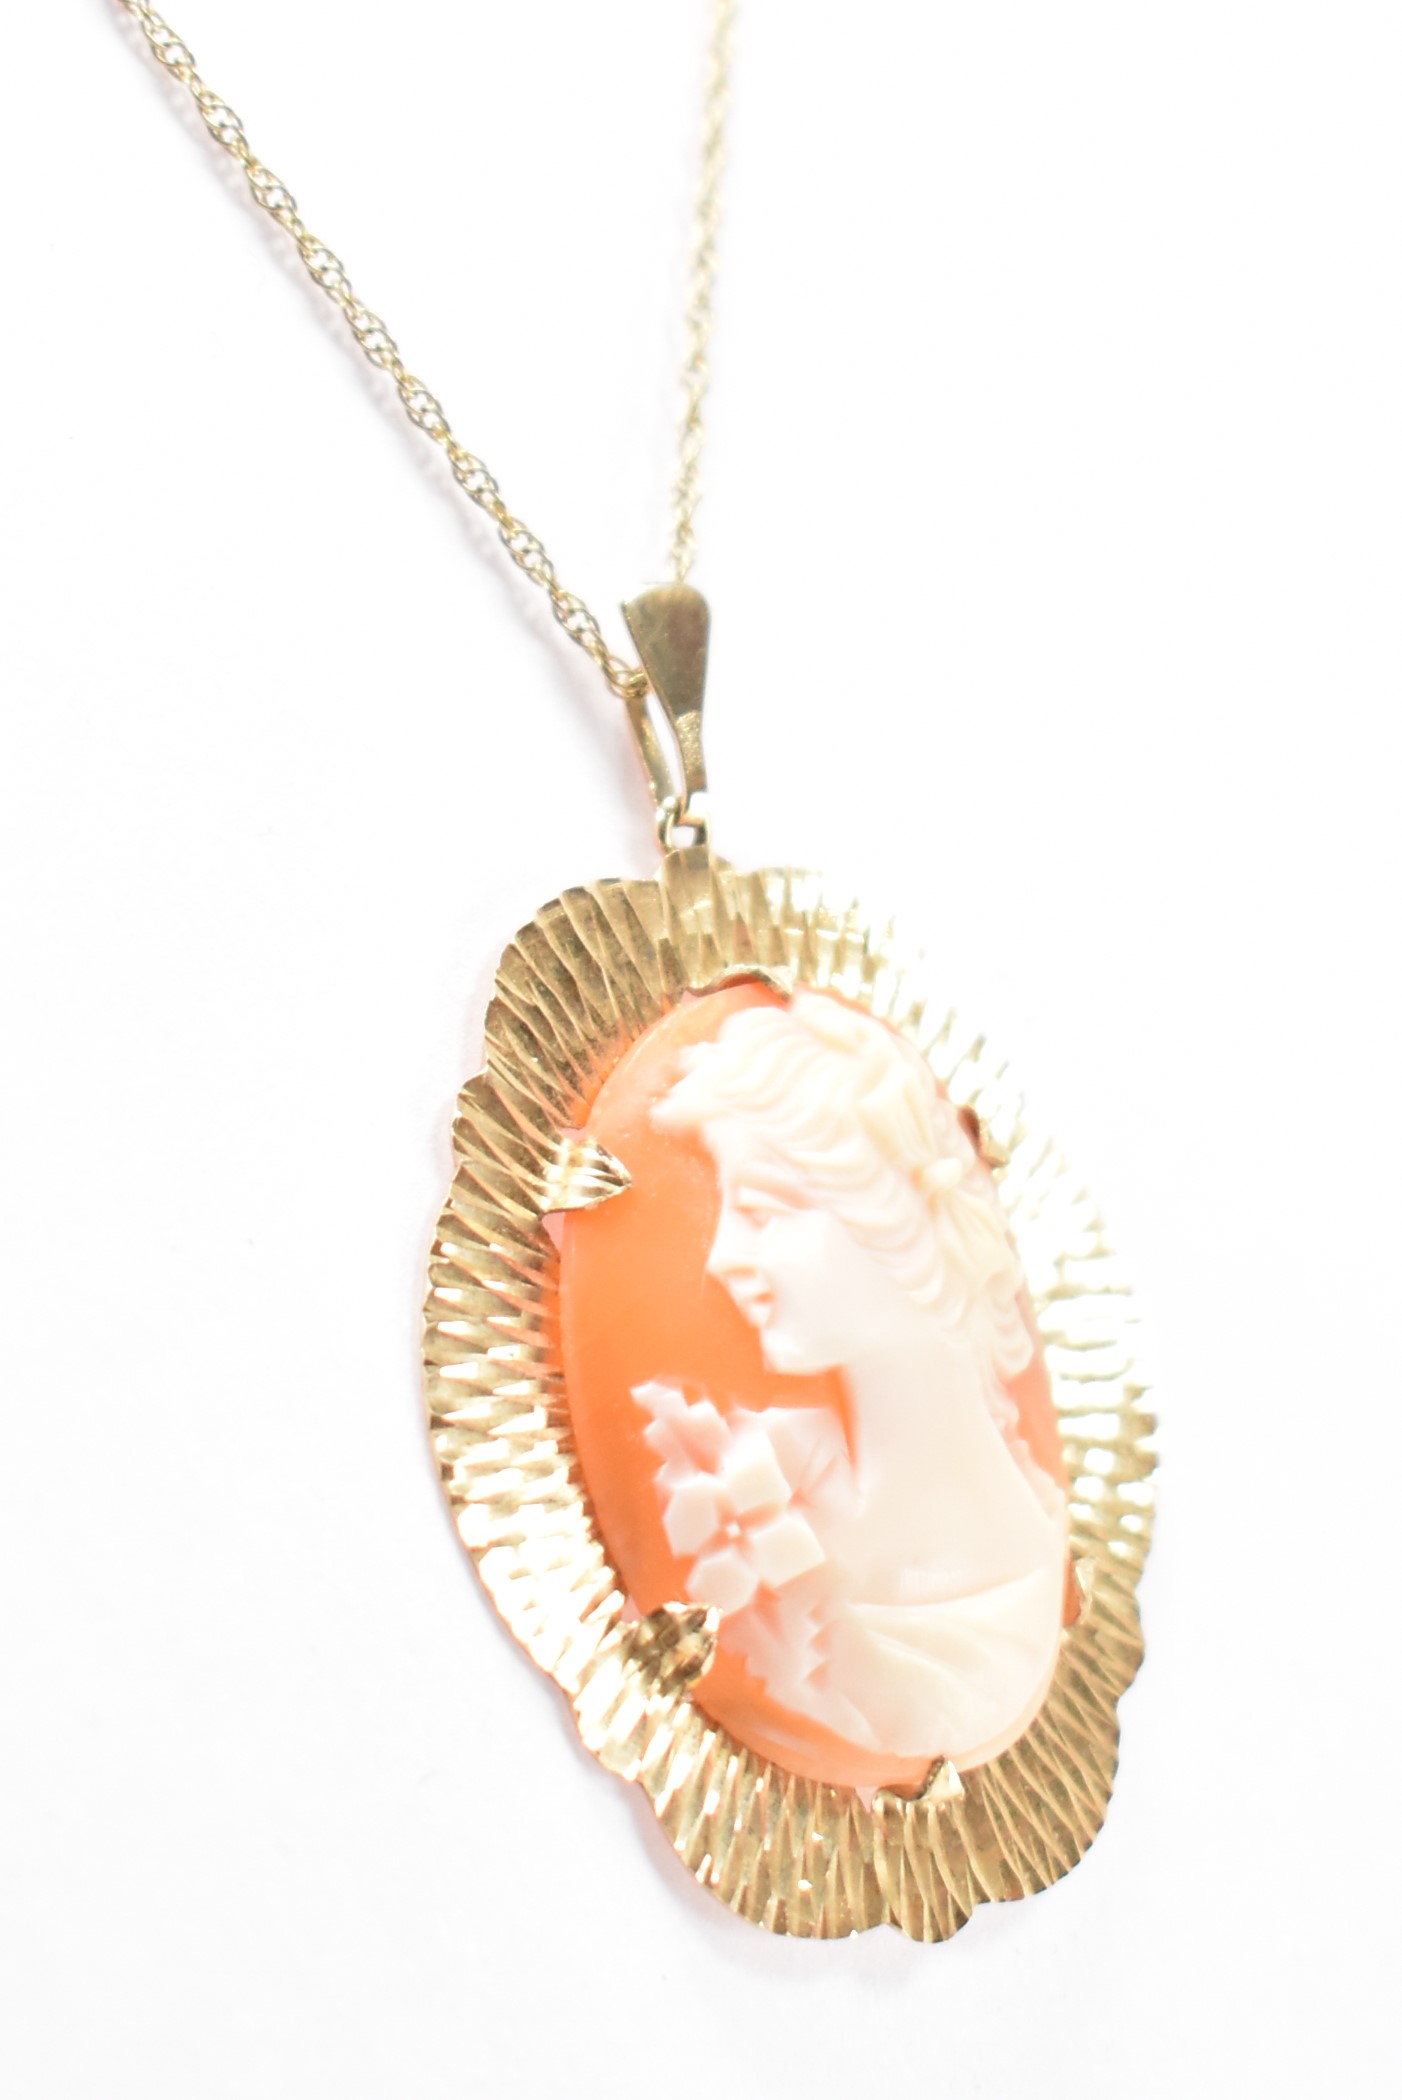 HALLMARKED 9CT GOLD & CARVED SHELL CAMEO PENDANT - Image 2 of 6